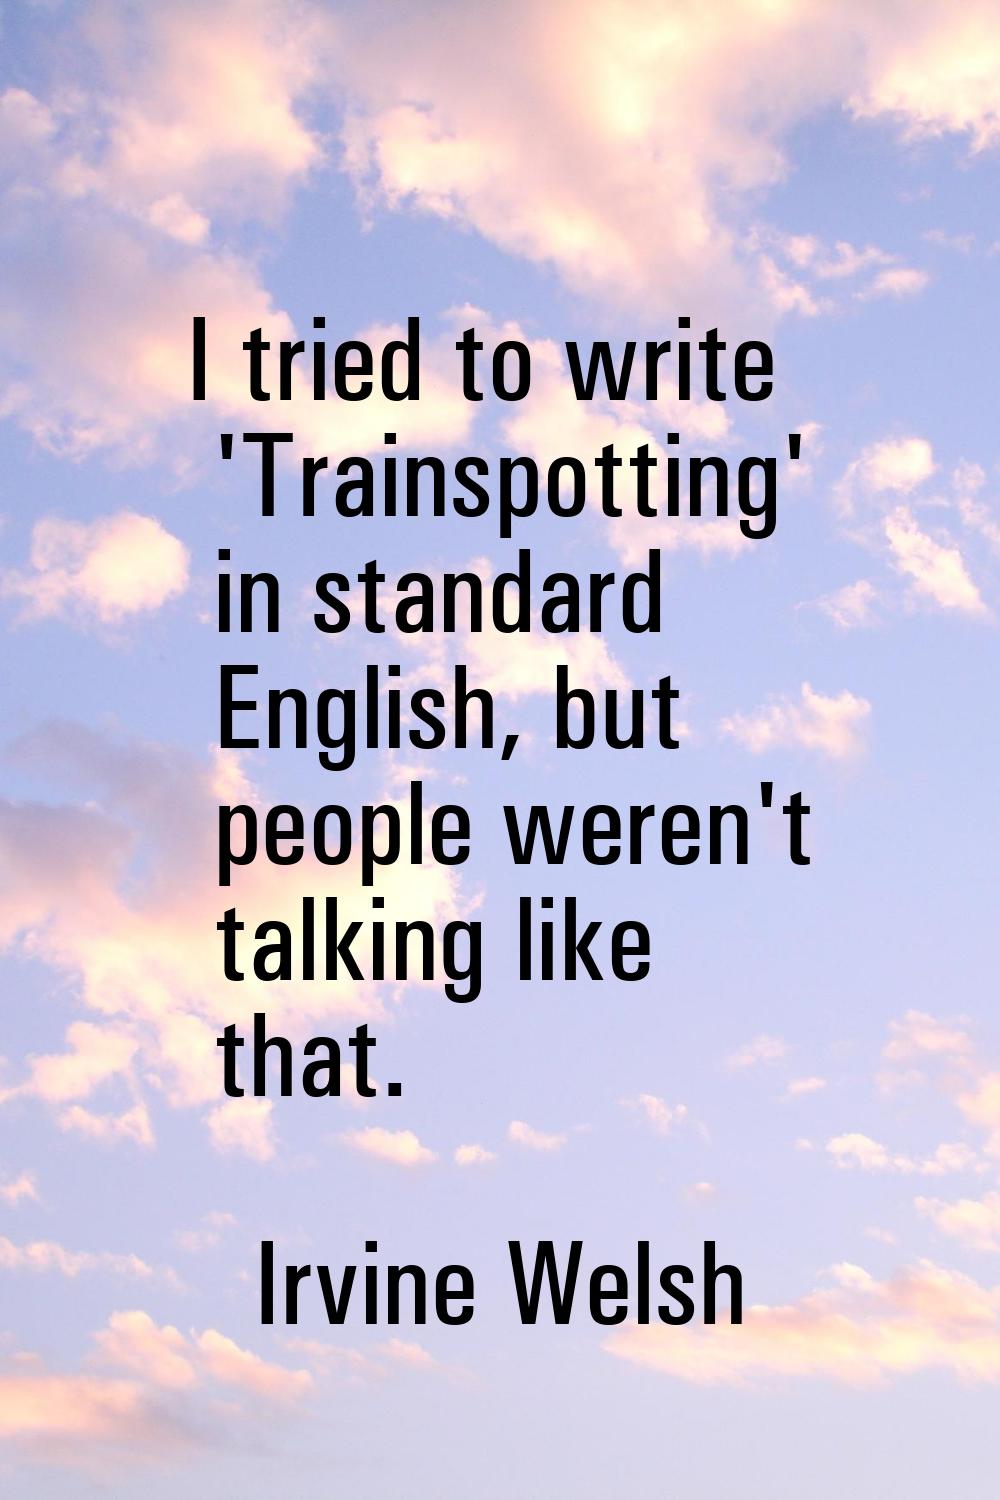 I tried to write 'Trainspotting' in standard English, but people weren't talking like that.